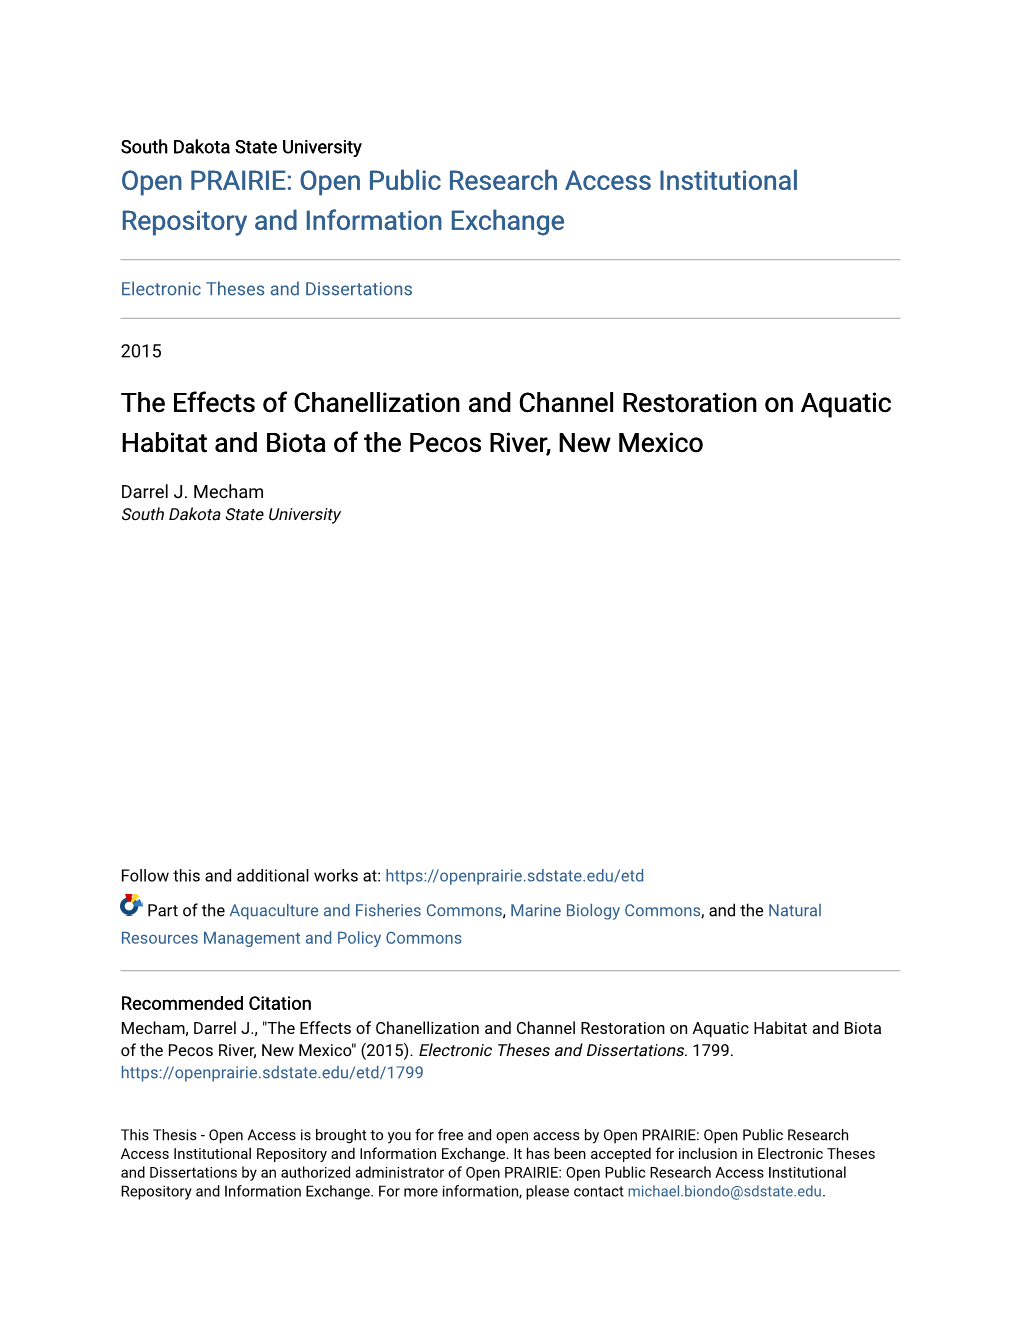 The Effects of Chanellization and Channel Restoration on Aquatic Habitat and Biota of the Pecos River, New Mexico